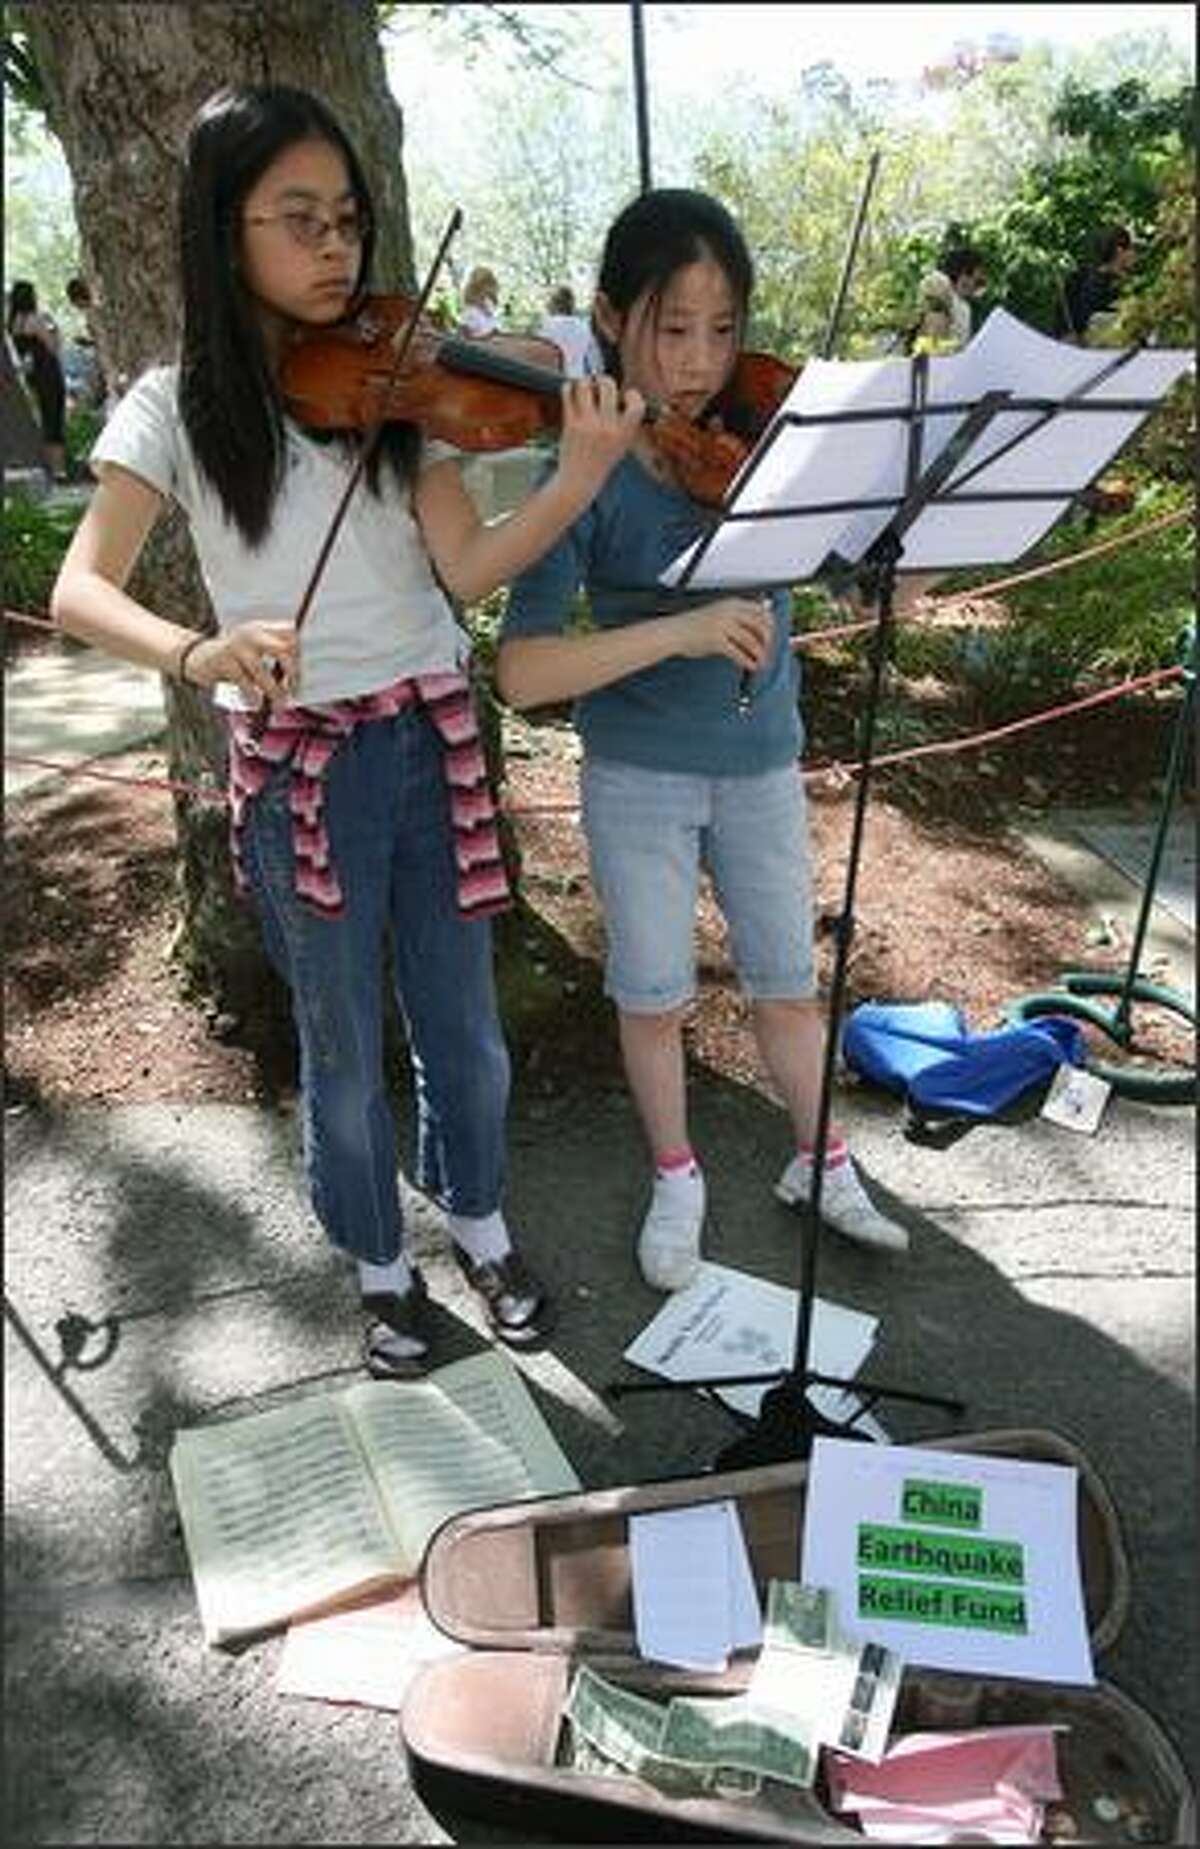 Sophie Ding, 11, left, and Elizabeth West, 12, both of Seattle, played violin to raise money for the Red Cross China Earthquake Relief Fund.